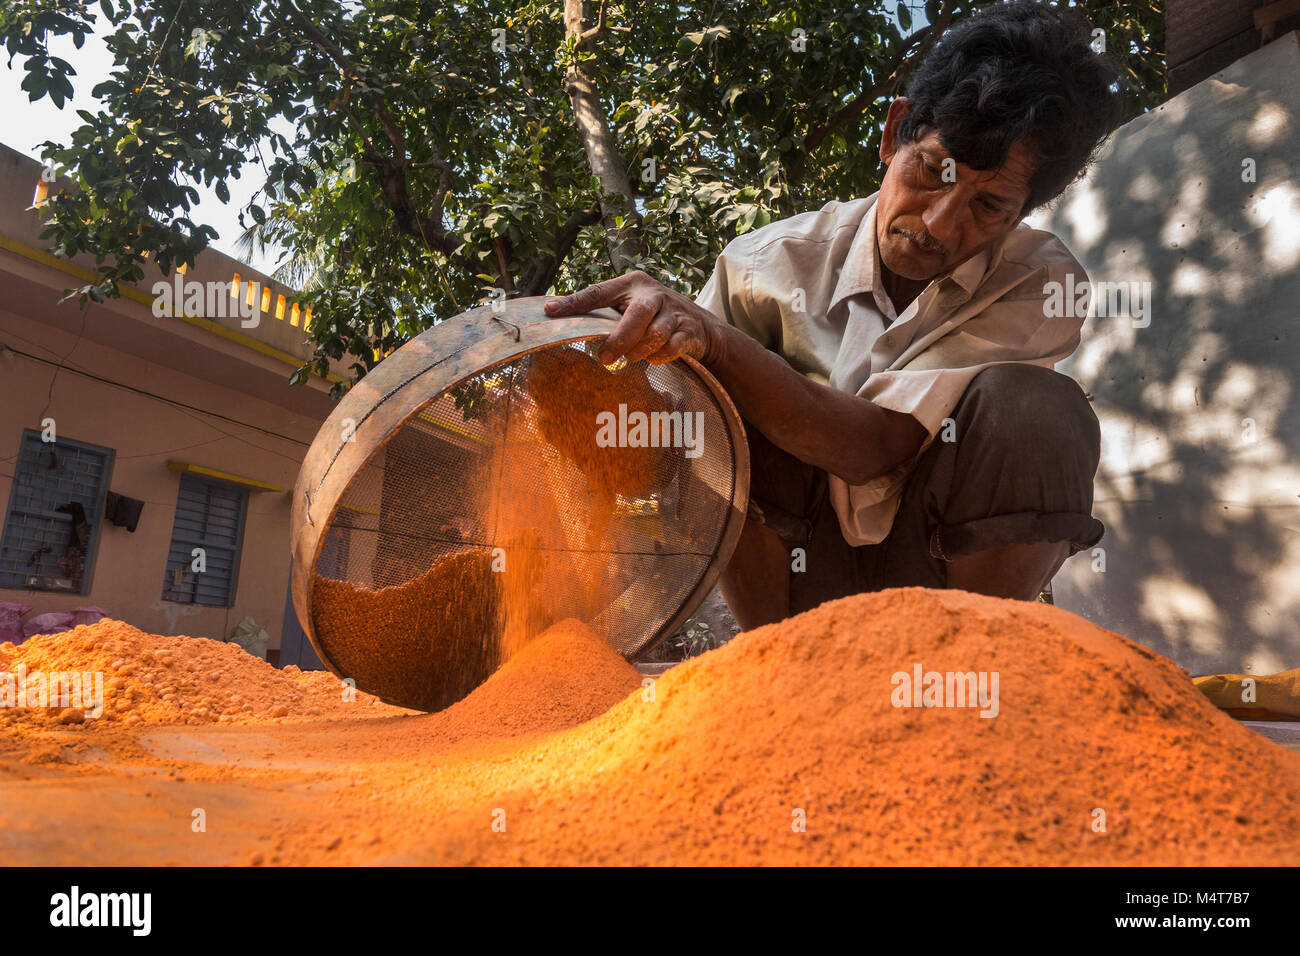 Kolkata, India. 17th Feb, 2018. An Indian man prepares gulal or colored powder, which will be used for the upcoming Holi Festival, at Uttar Chara village, some 110 km away from Kolkata, India, on Feb. 17, 2018. Holi Festival, also known as Spring Festival of Colors, usually falls in the later part of February or March, and it is celebrated by Hindu residents around the world by throwing gulal at each other. Credit: Tumpa Mondal/Xinhua/Alamy Live News Stock Photo